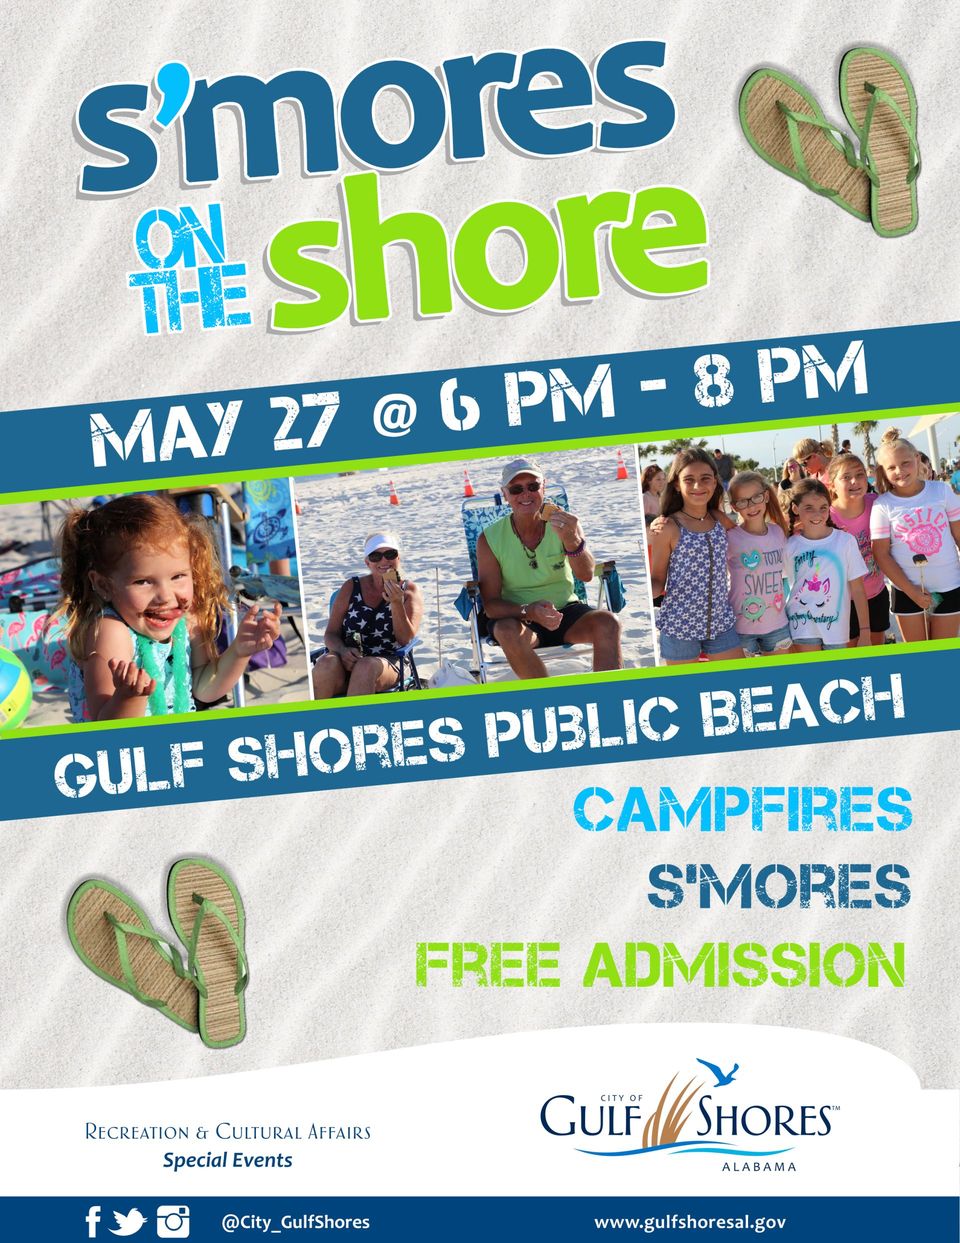 S Mores On The Shore Returns To Gulf Shores Public Beach